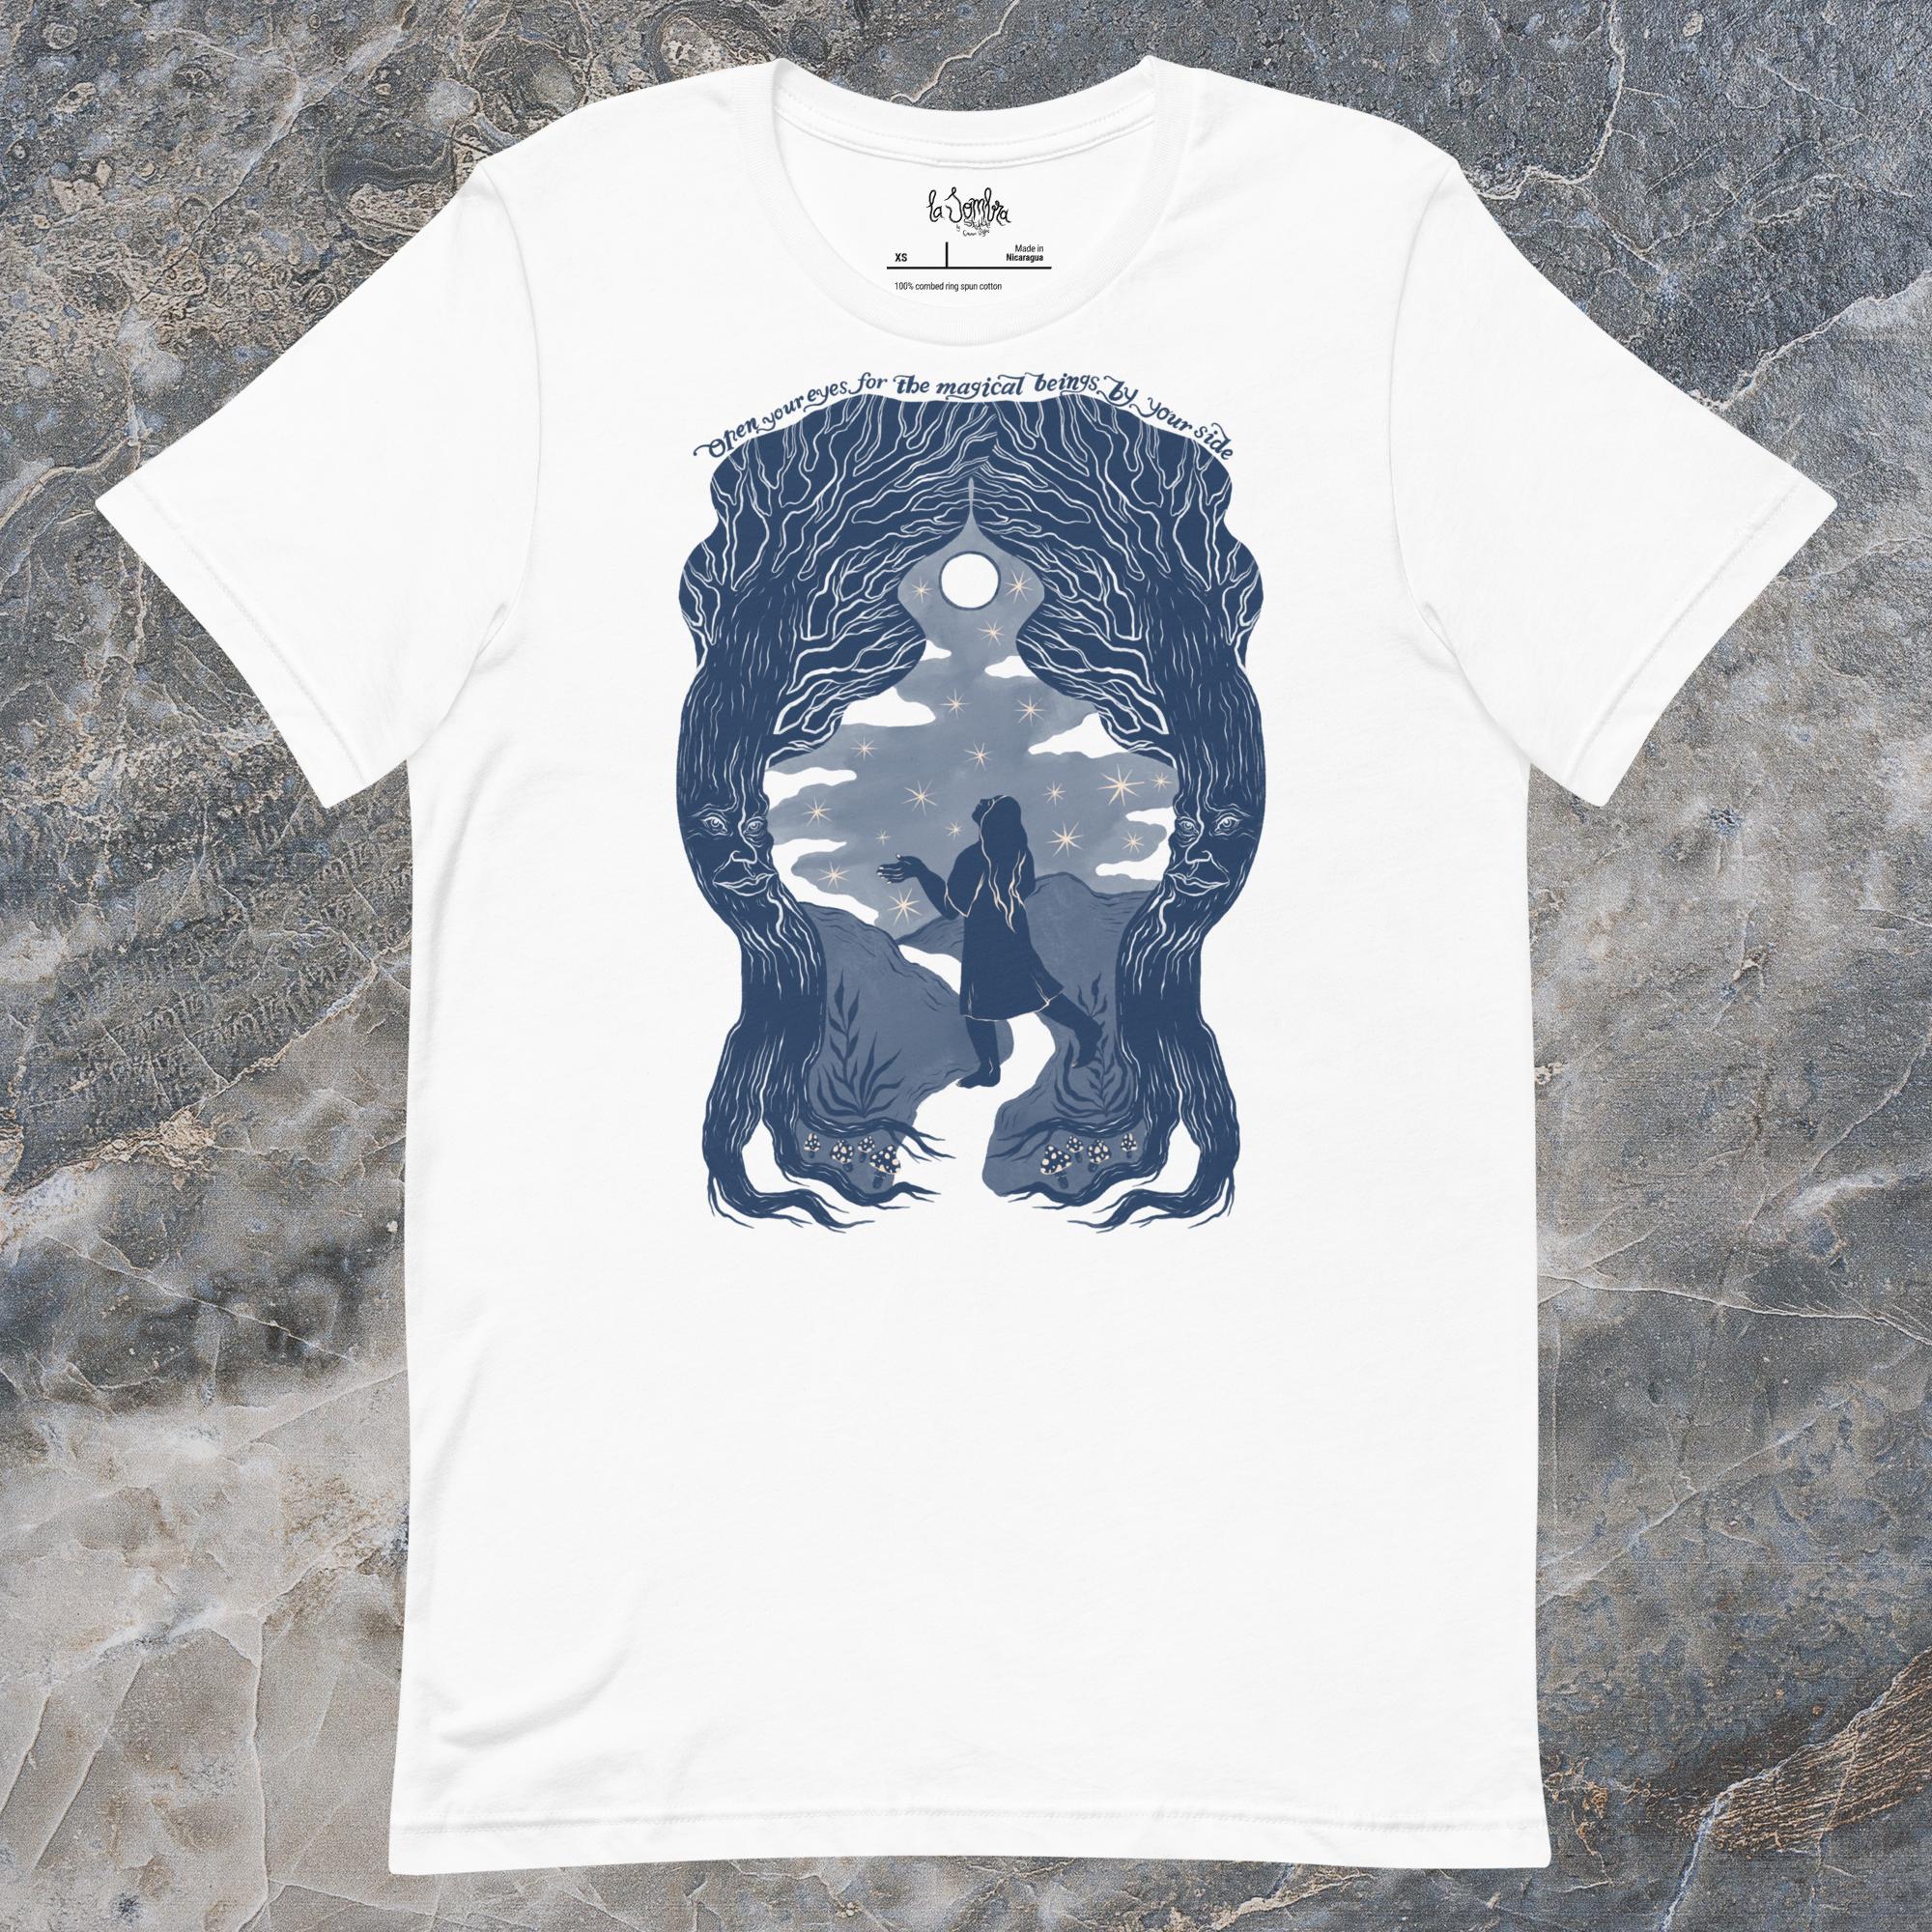 Magical Beings - Unisex t-shirt